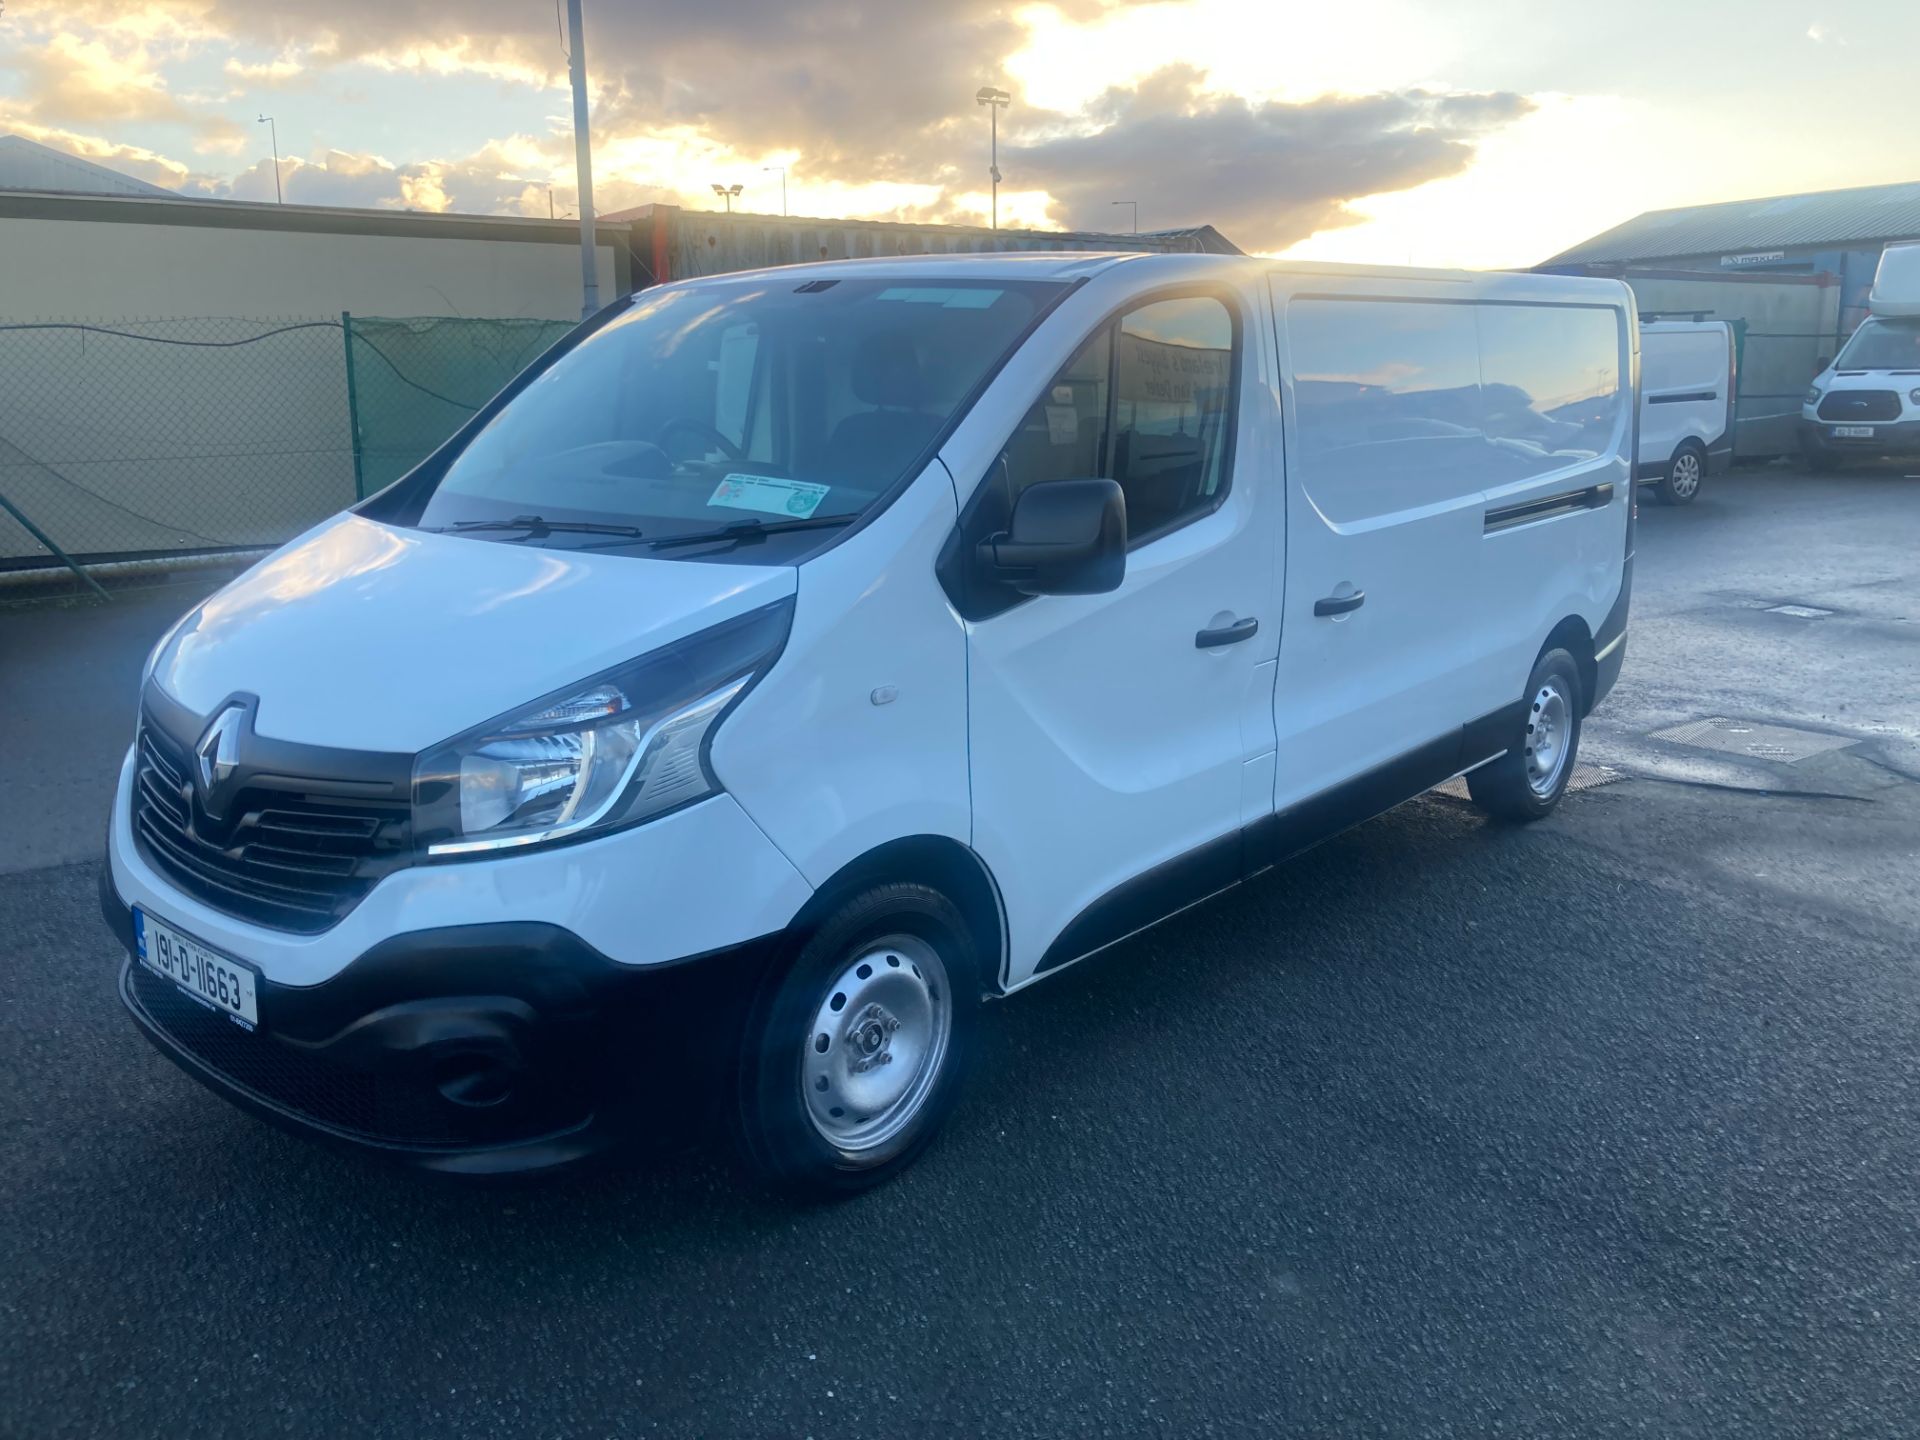 2019 Renault Trafic LL29 DCI 120 Business (191D11663) Image 3